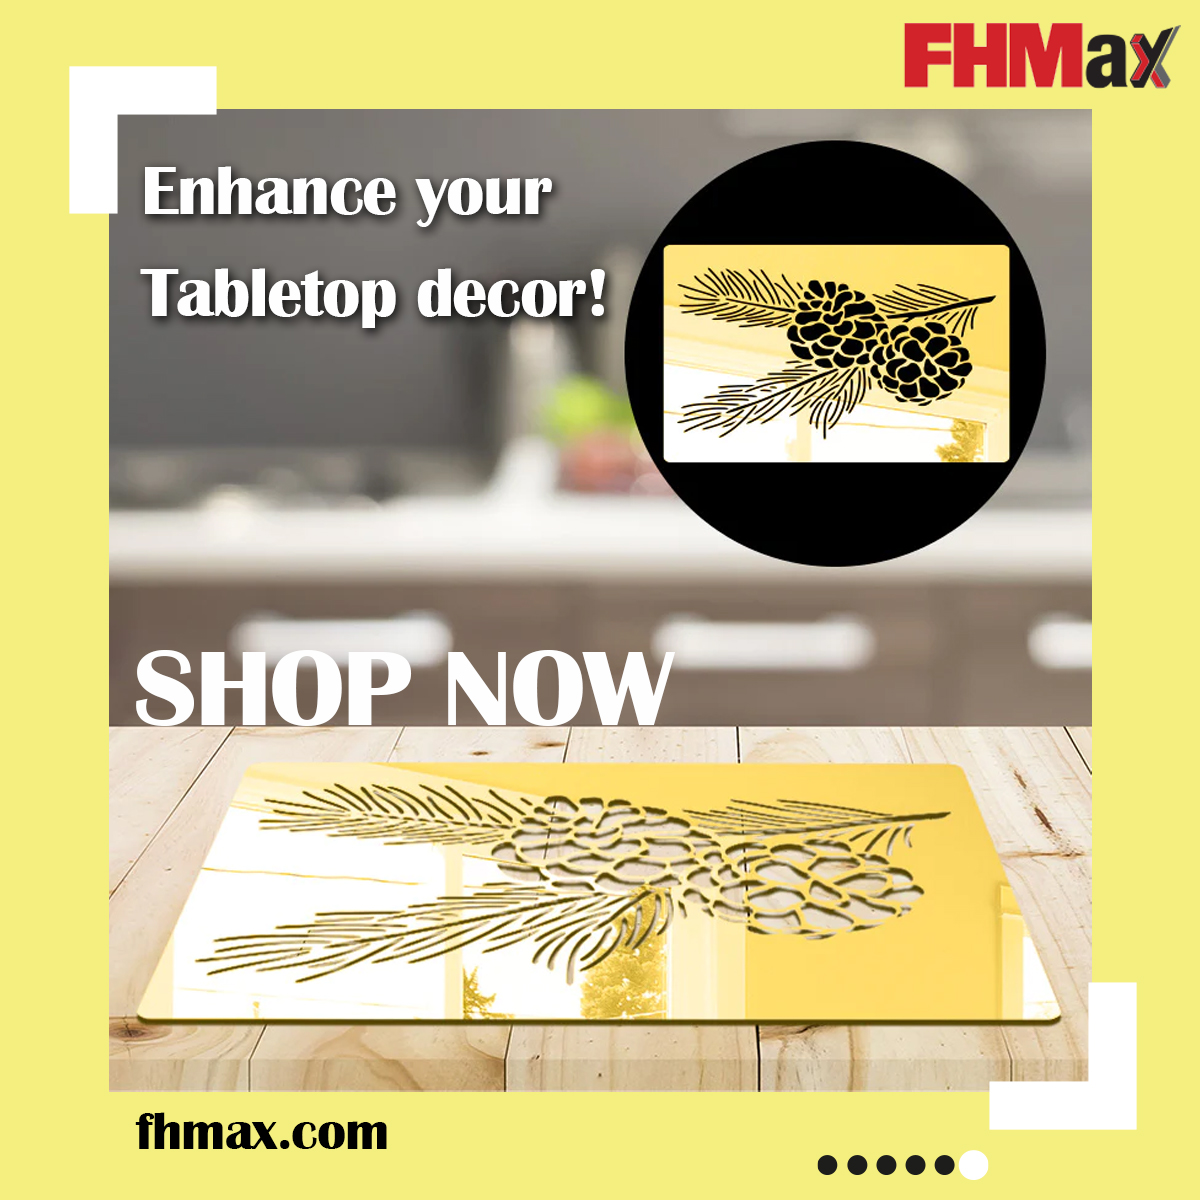 Want beautiful and shiny table mat for your table? Get this beautiful table mat only from fhmax.com and hurry up for better discount offers.
.
.
SHOP NOW FROM fhmax.com 👈.
.
#TableDecorations #homedecor #shopnow